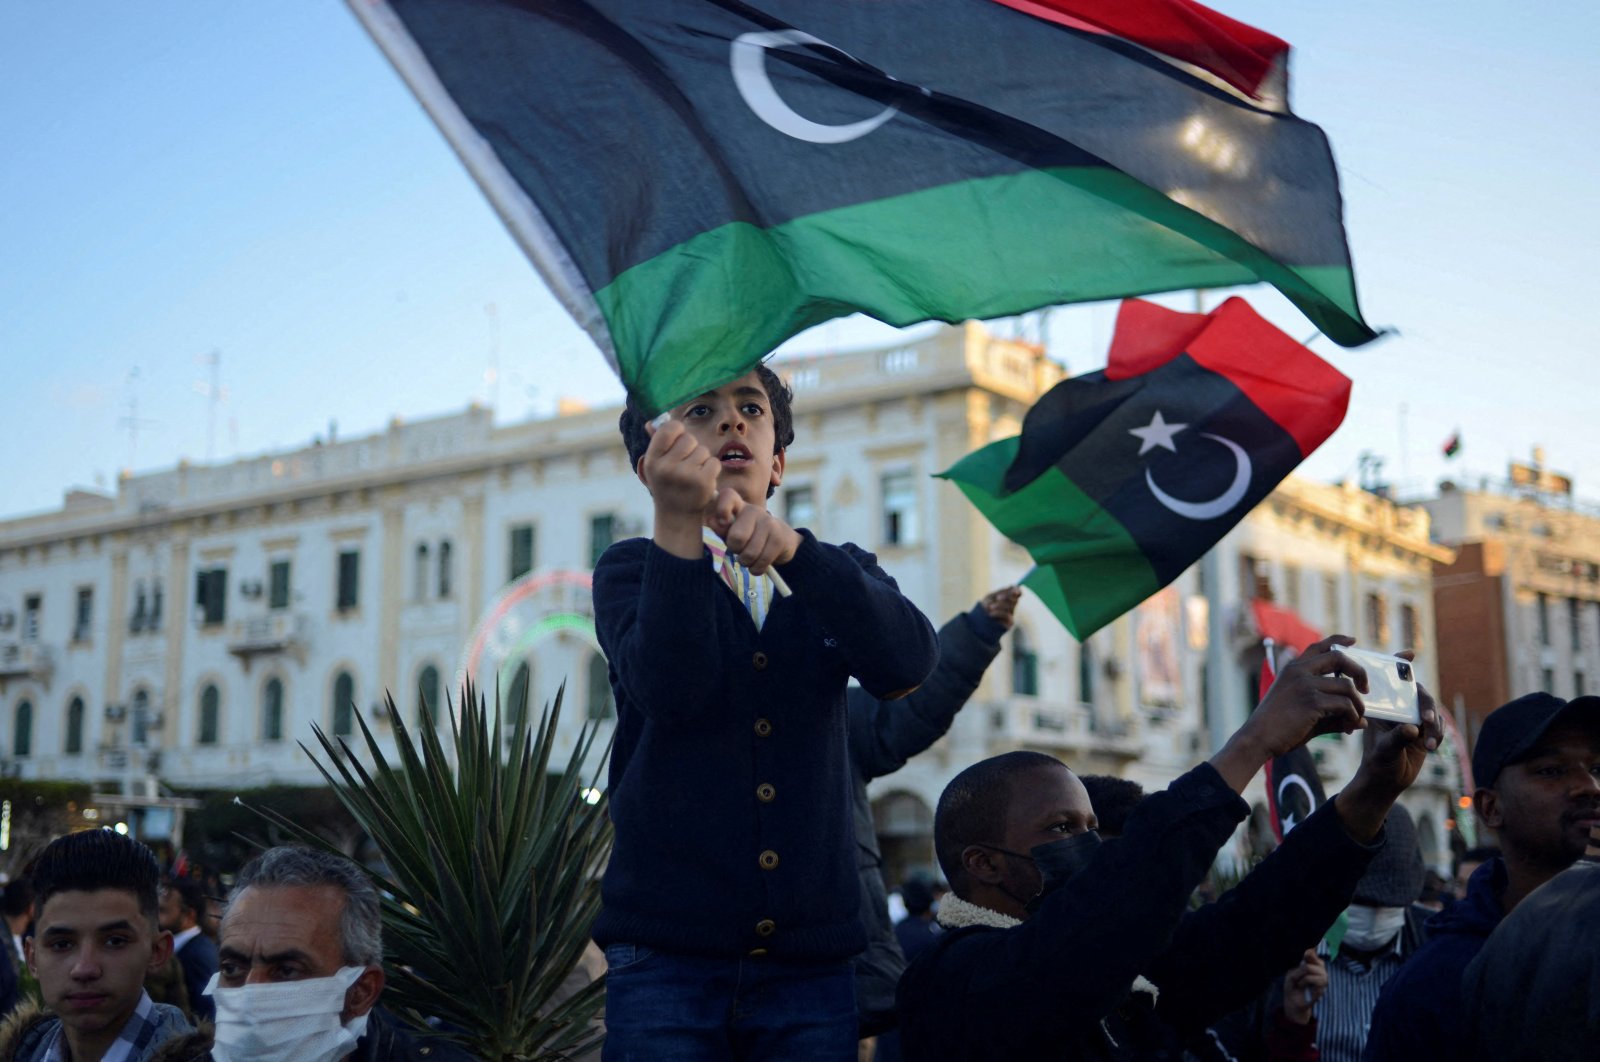 A boy waves a Libyan flag as people gather during celebrations commemorating the 11th anniversary of the 2011 revolution in Tripoli, Libya, Feb. 18, 2022. (REUTERS Photo)